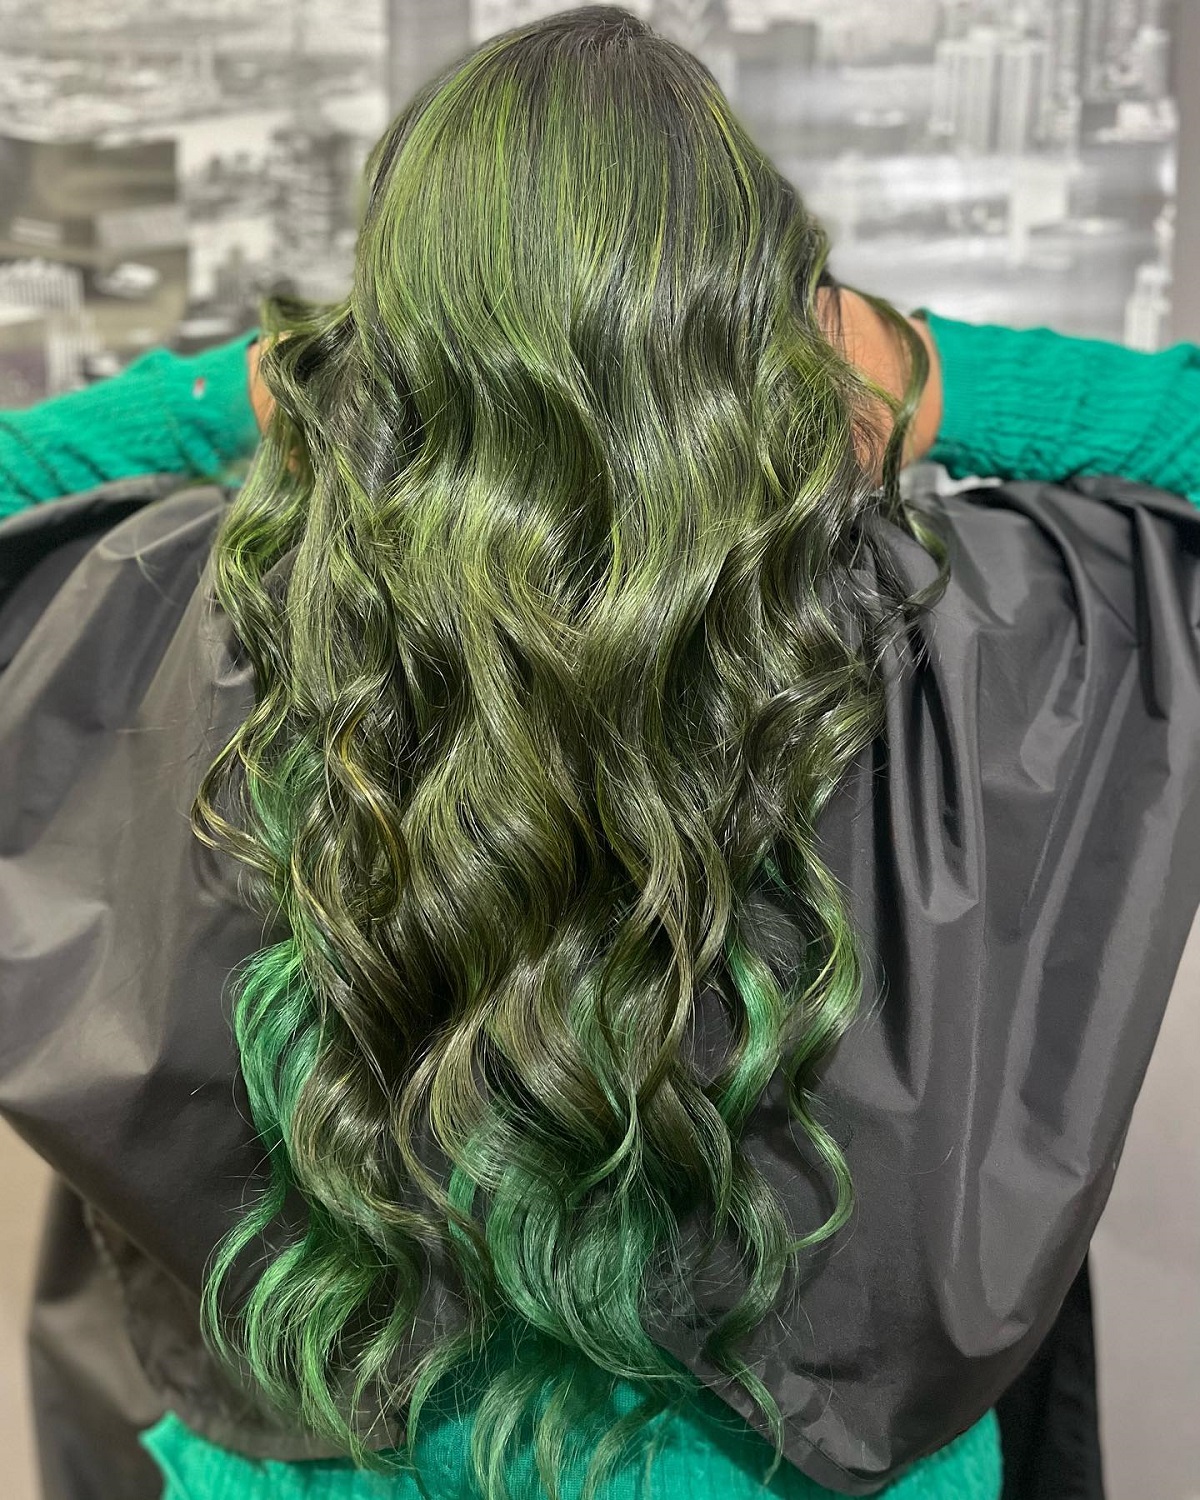 Black and Moss Green Wavy Hair